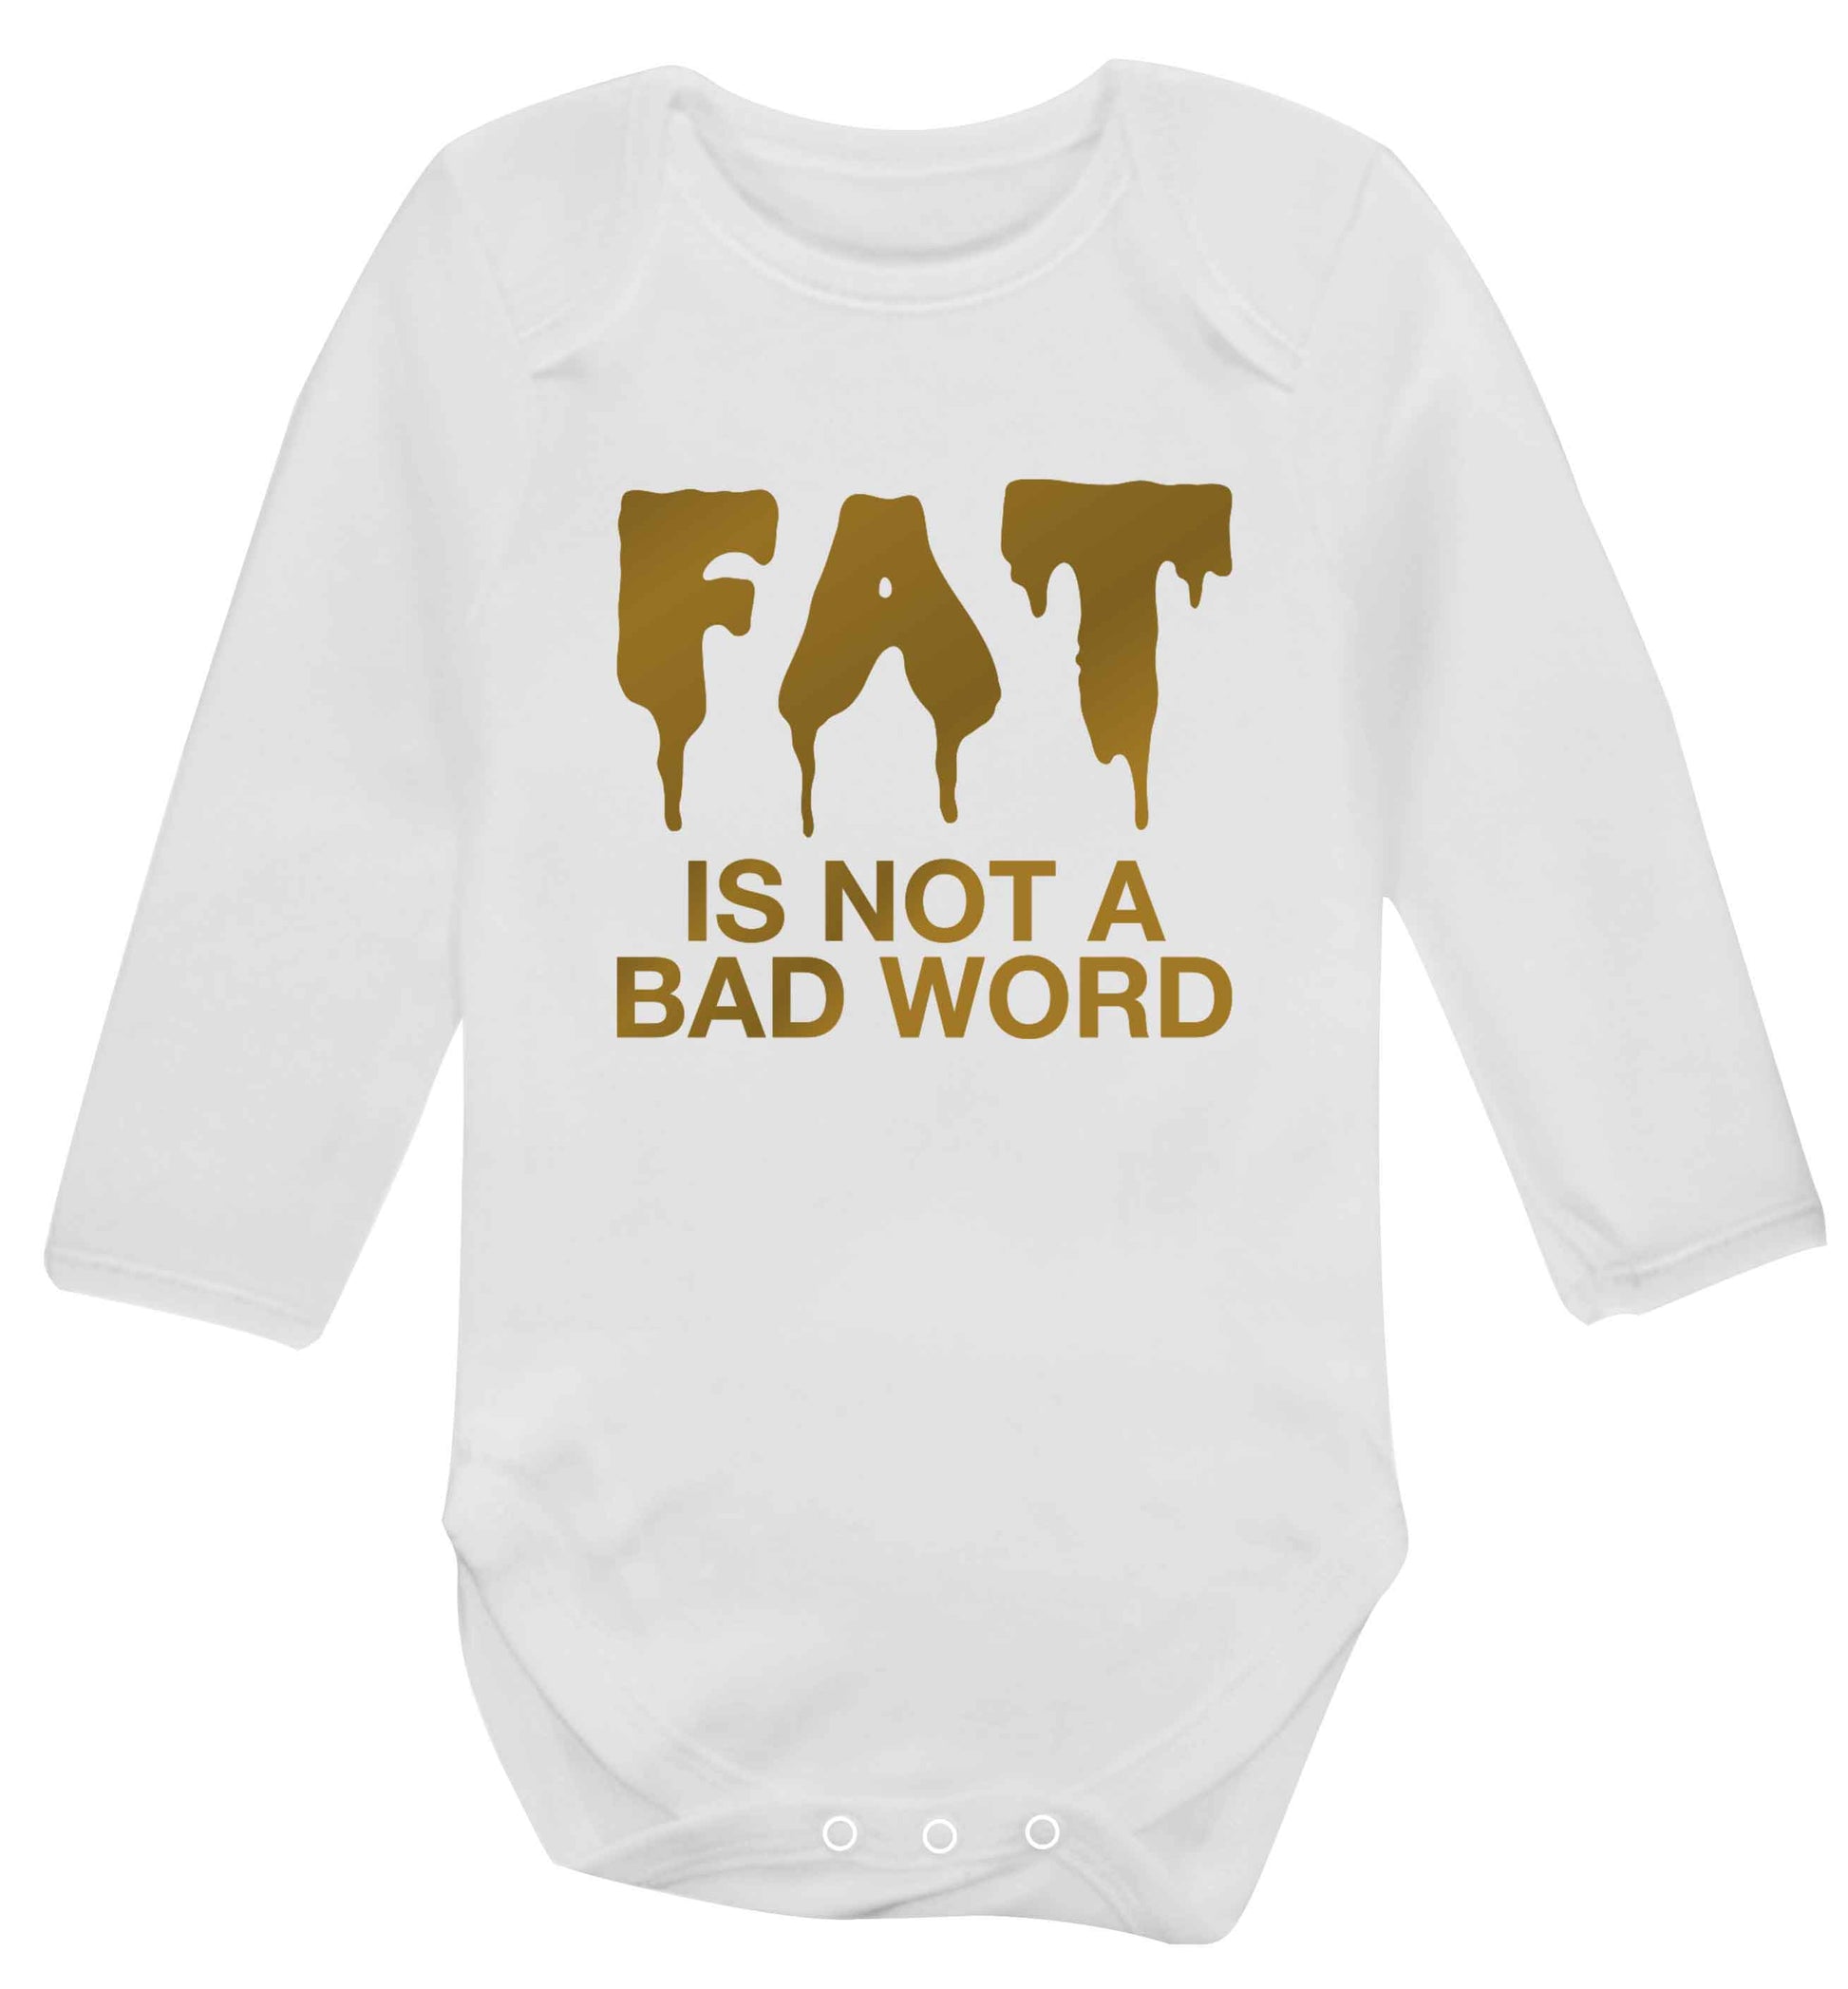 Fat is not a bad word baby vest long sleeved white 6-12 months